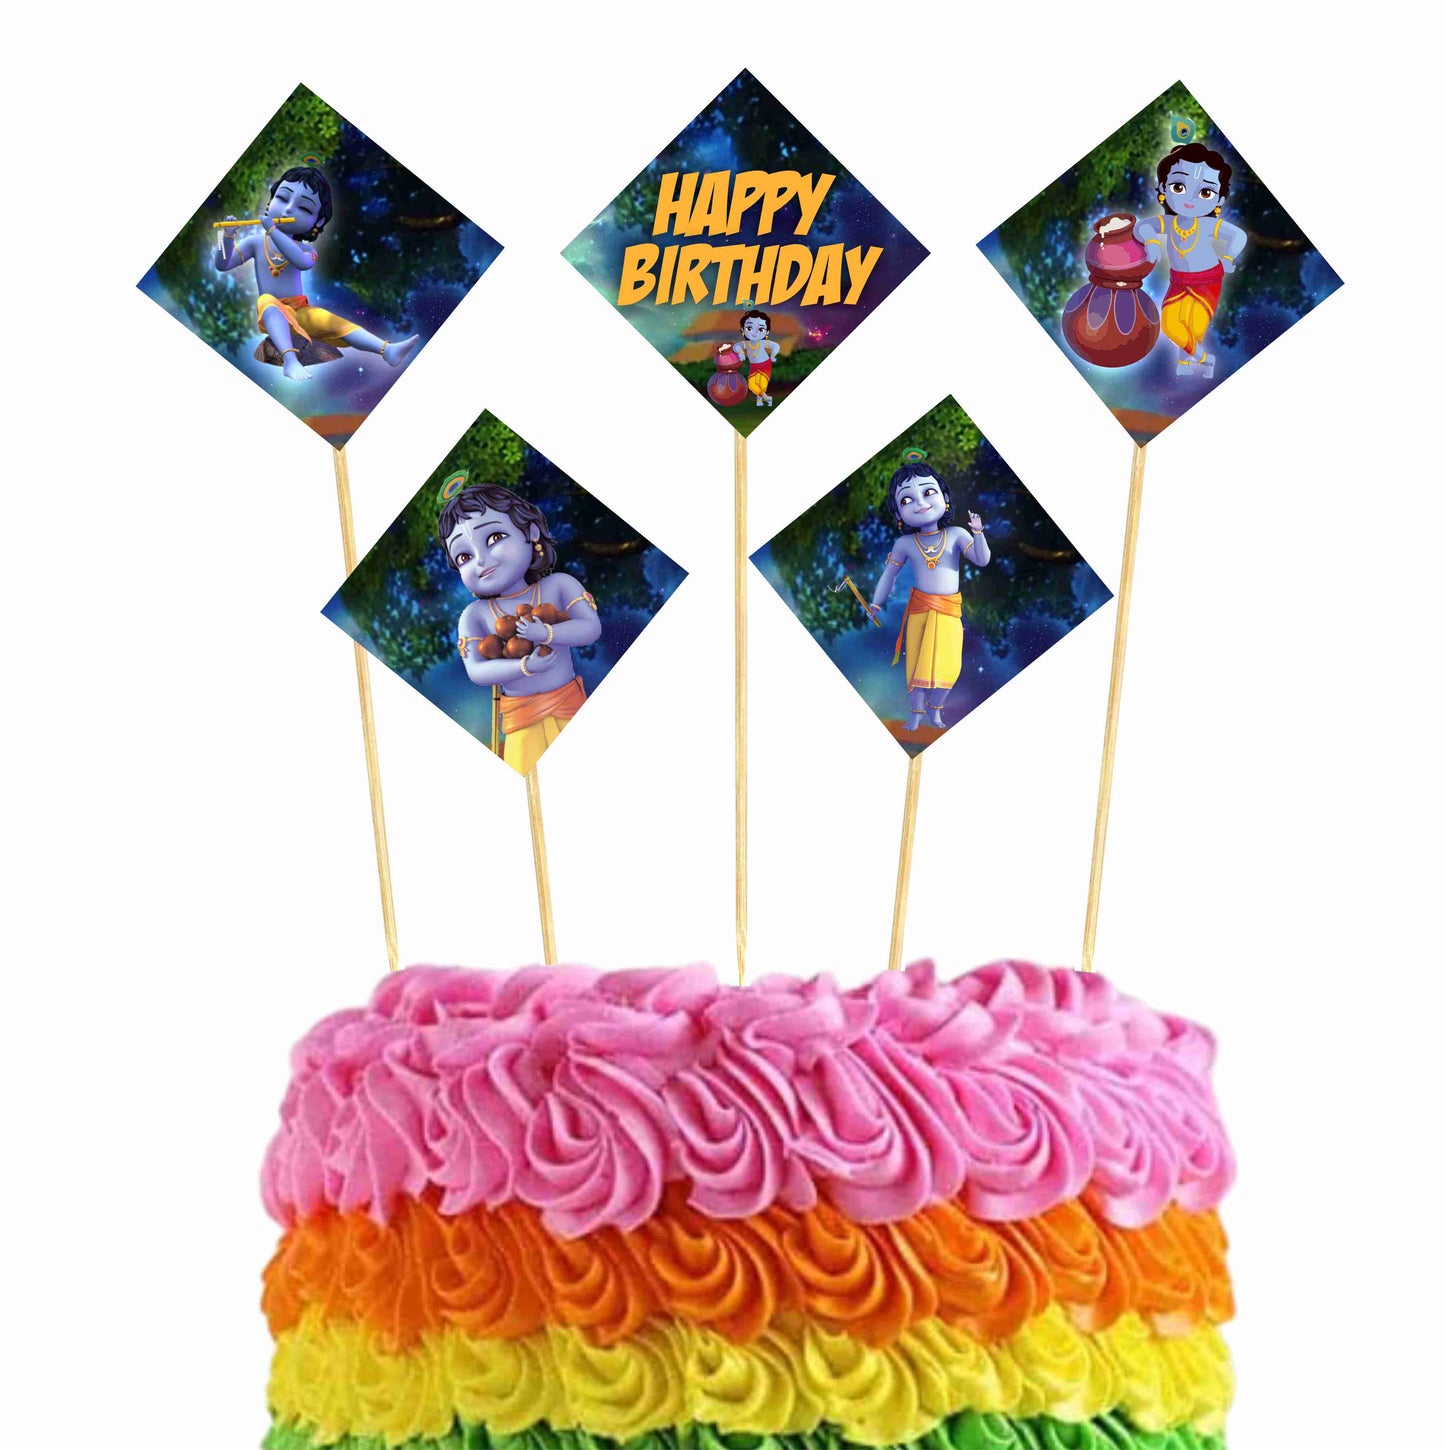 Krishna Theme Cake Topper Pack of 10 Nos for Birthday Cake Decoration Theme Party Item For Boys Girls Adults Birthday Theme Decor